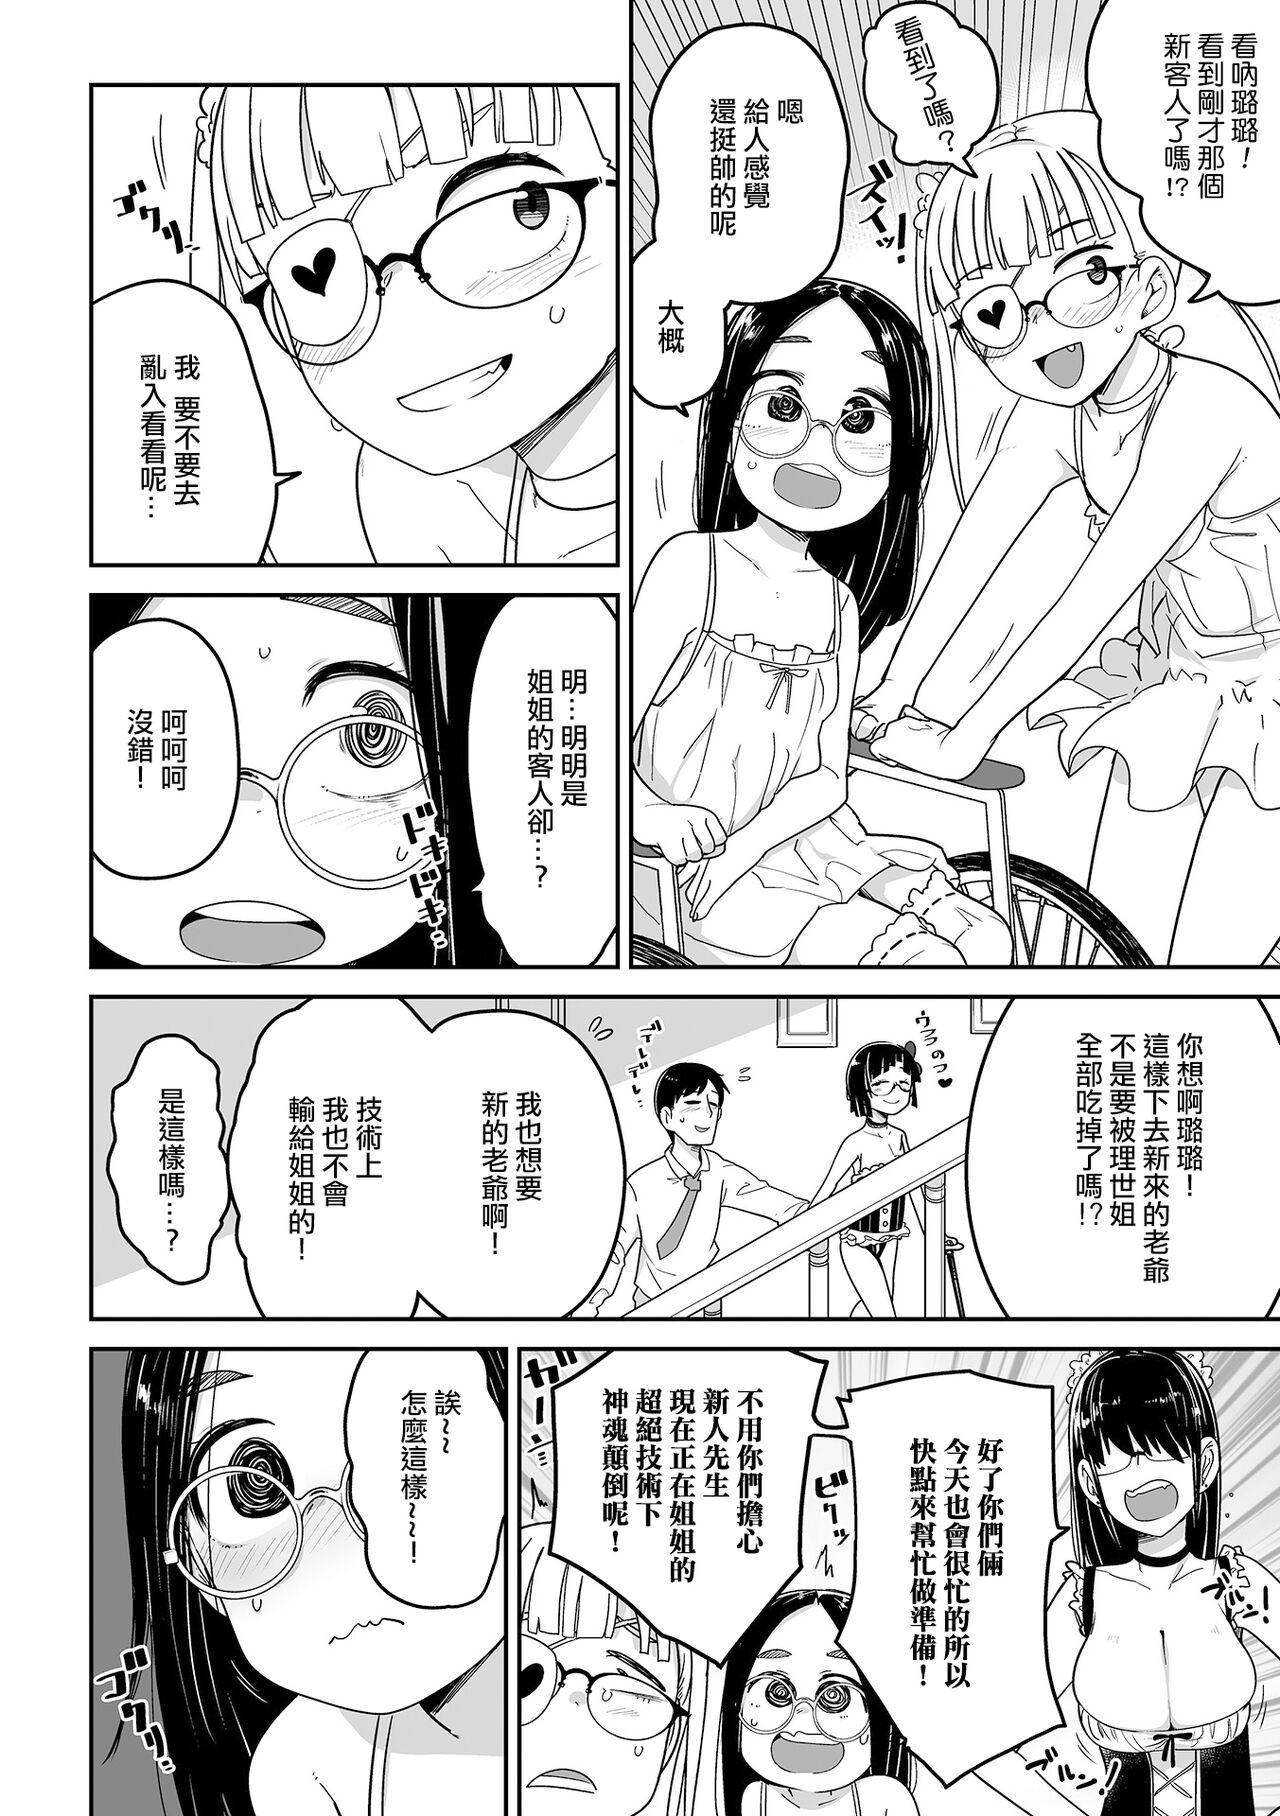 Amature Sex Kesson Shoukan e Youkoso | 歡迎來到殘缺娼館！ Pay - Page 5